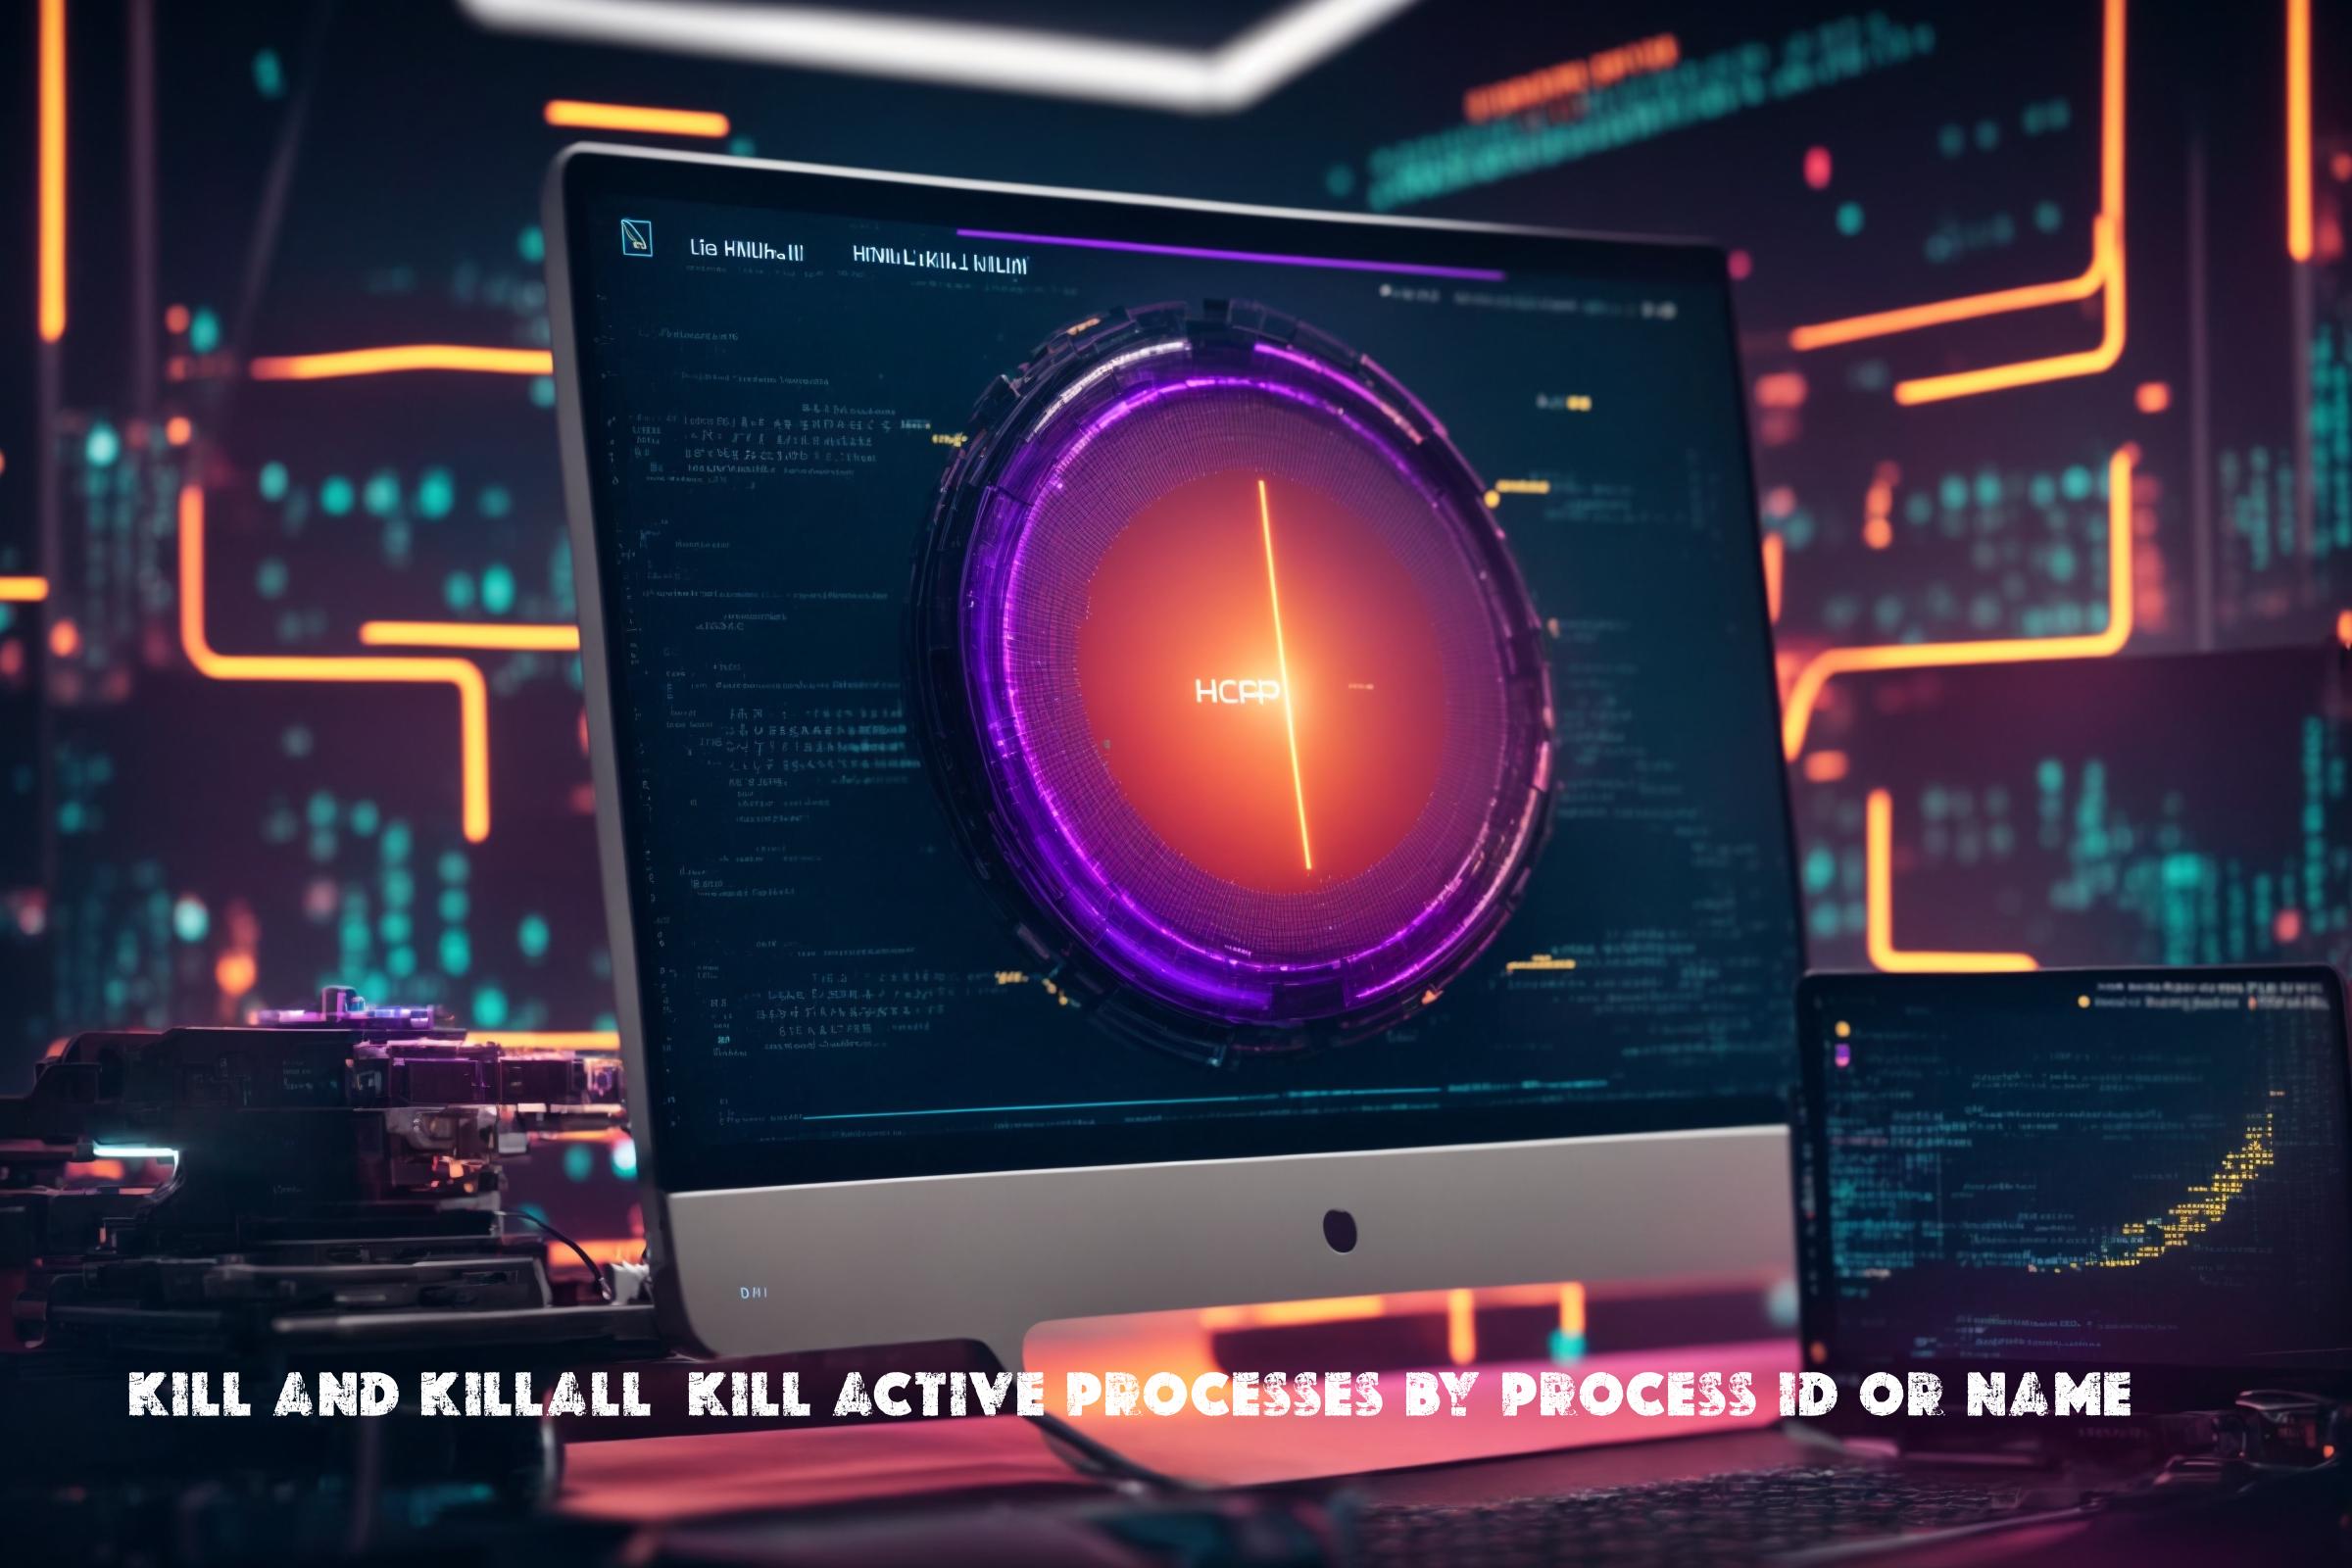 Guide for kill and killall (Kill active processes by process ID or name)